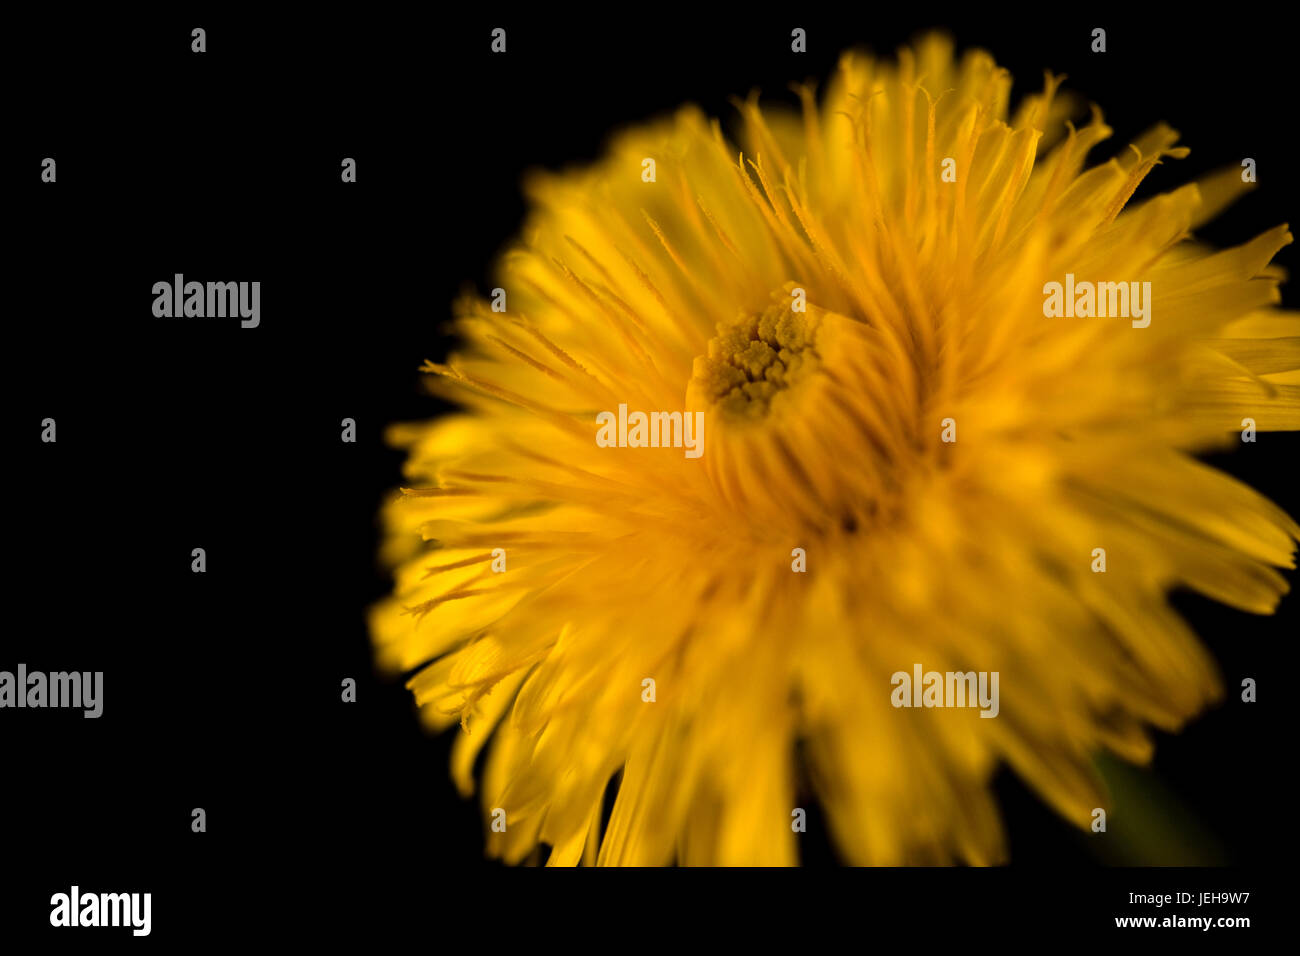 Close up of a Dandelion flower Stock Photo